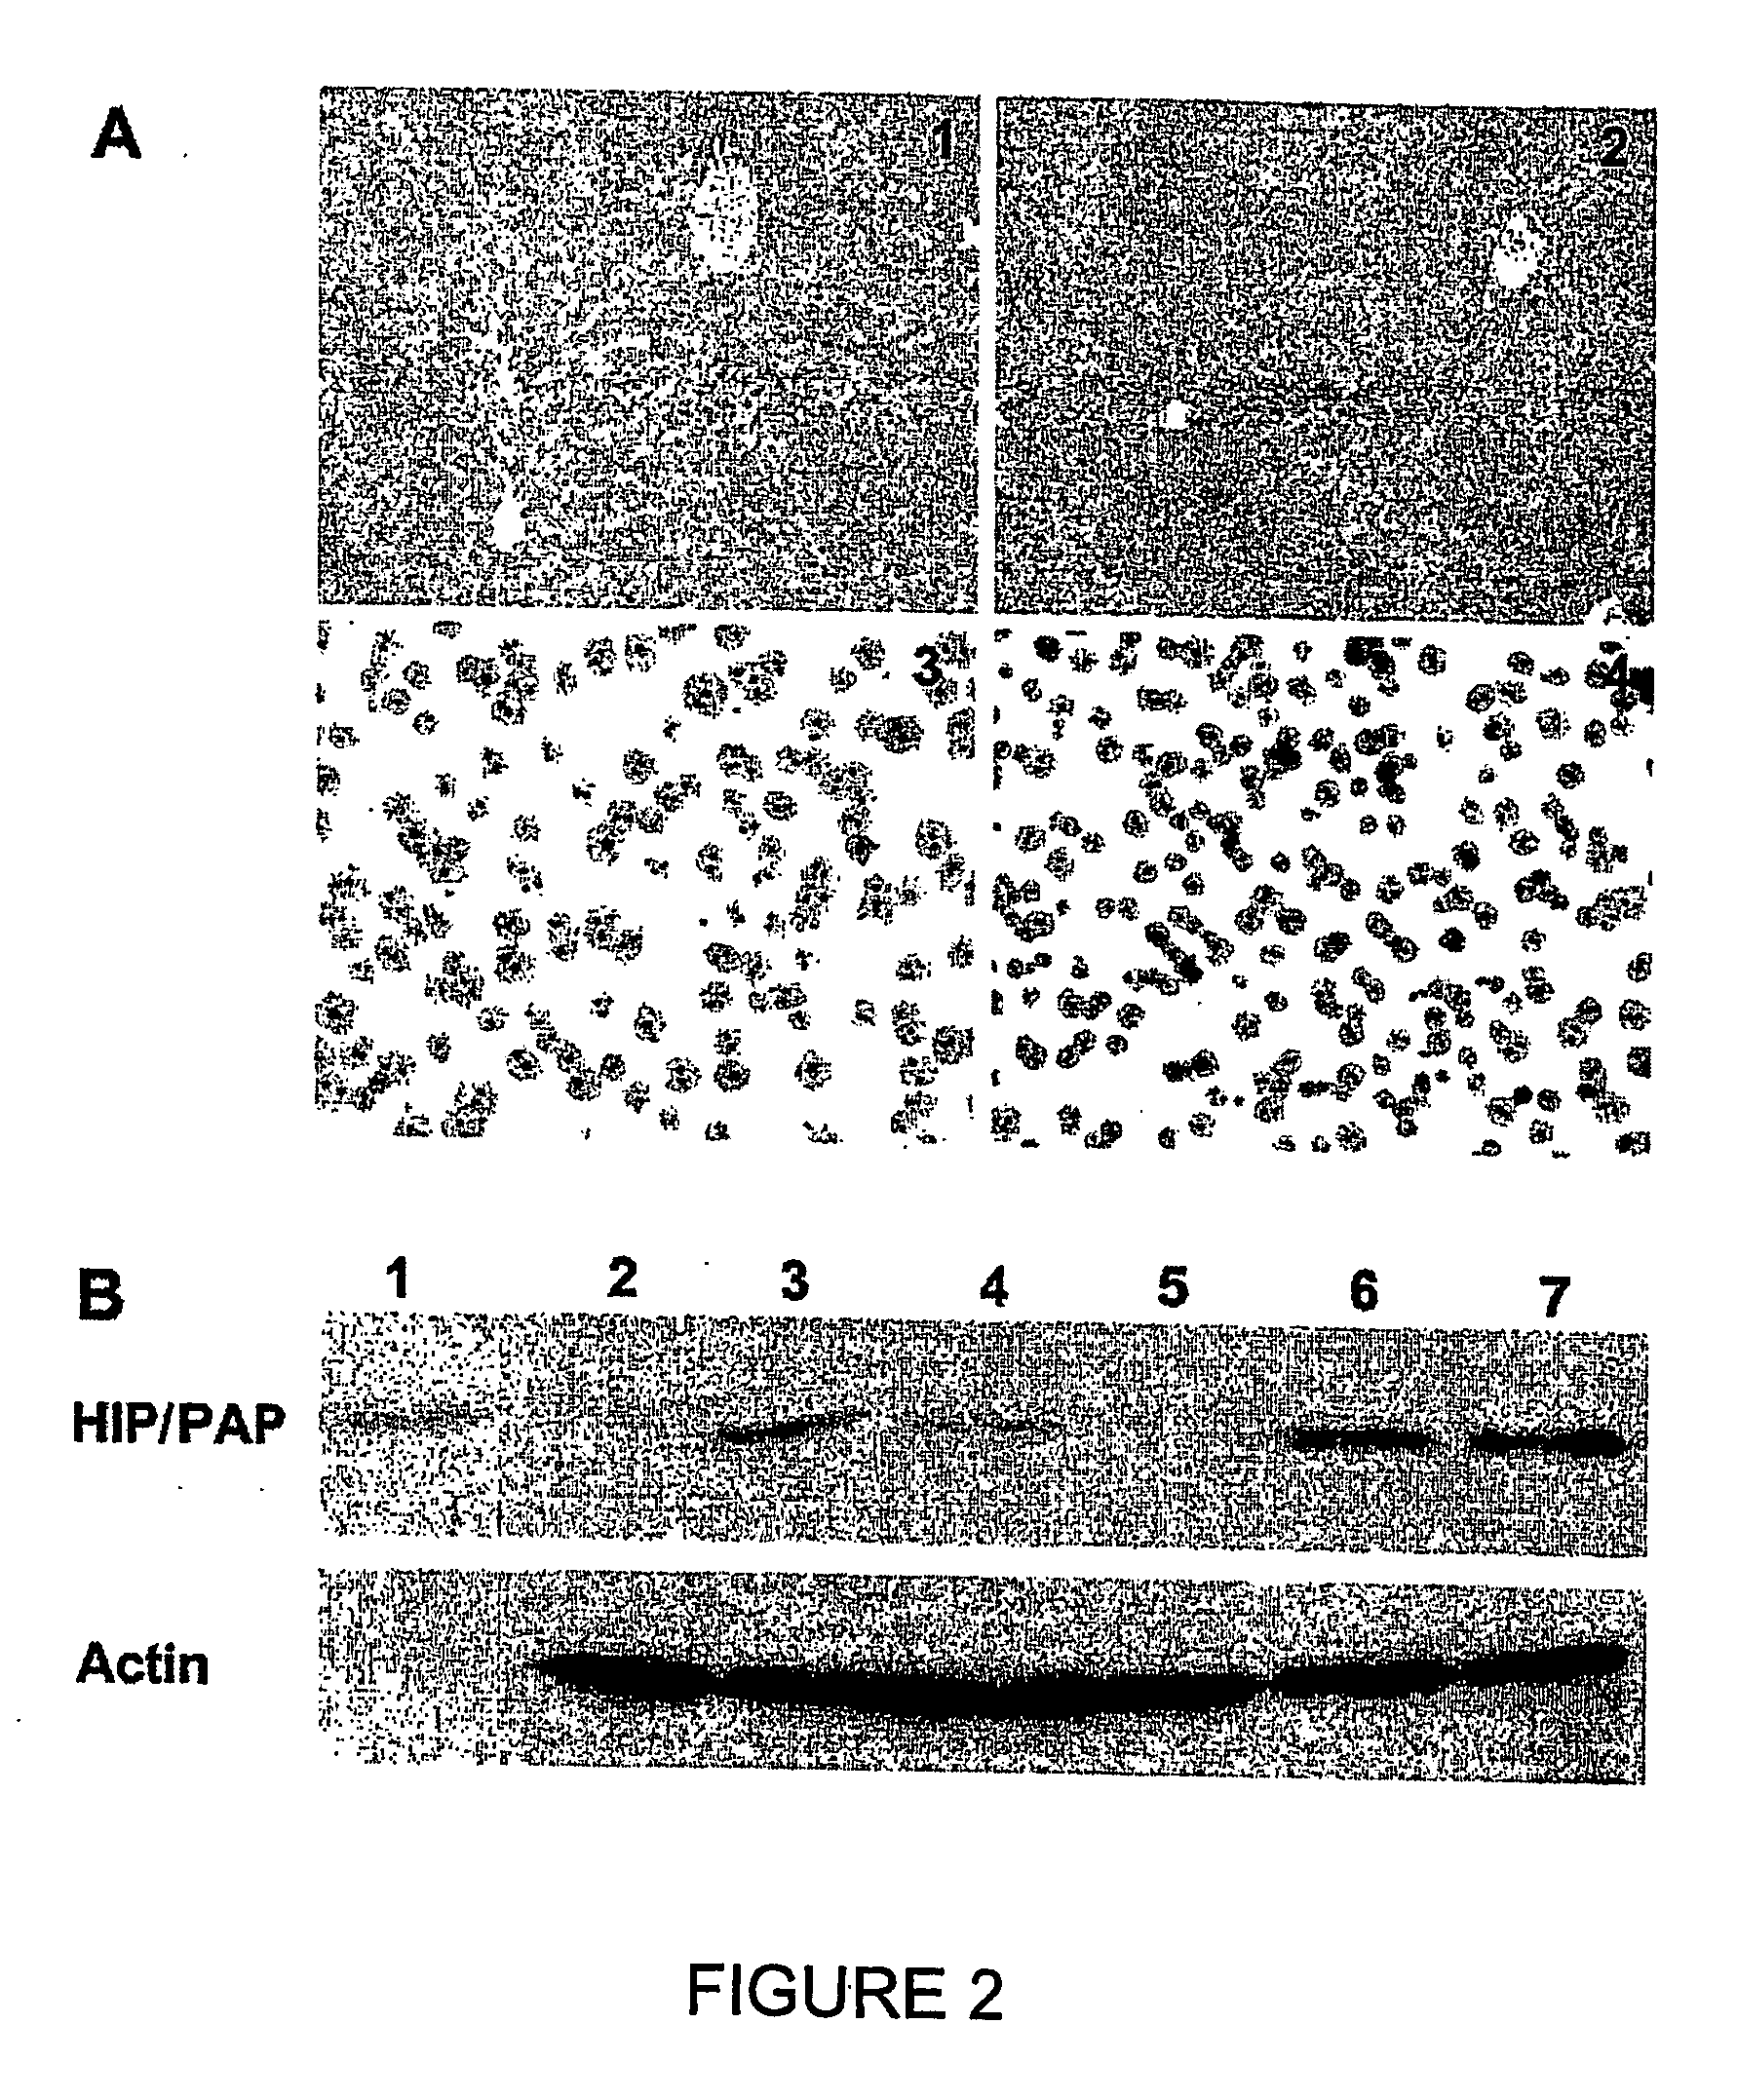 Hip/pap polypeptide compositions for use in liver regeneration and for the prevention of liver failure